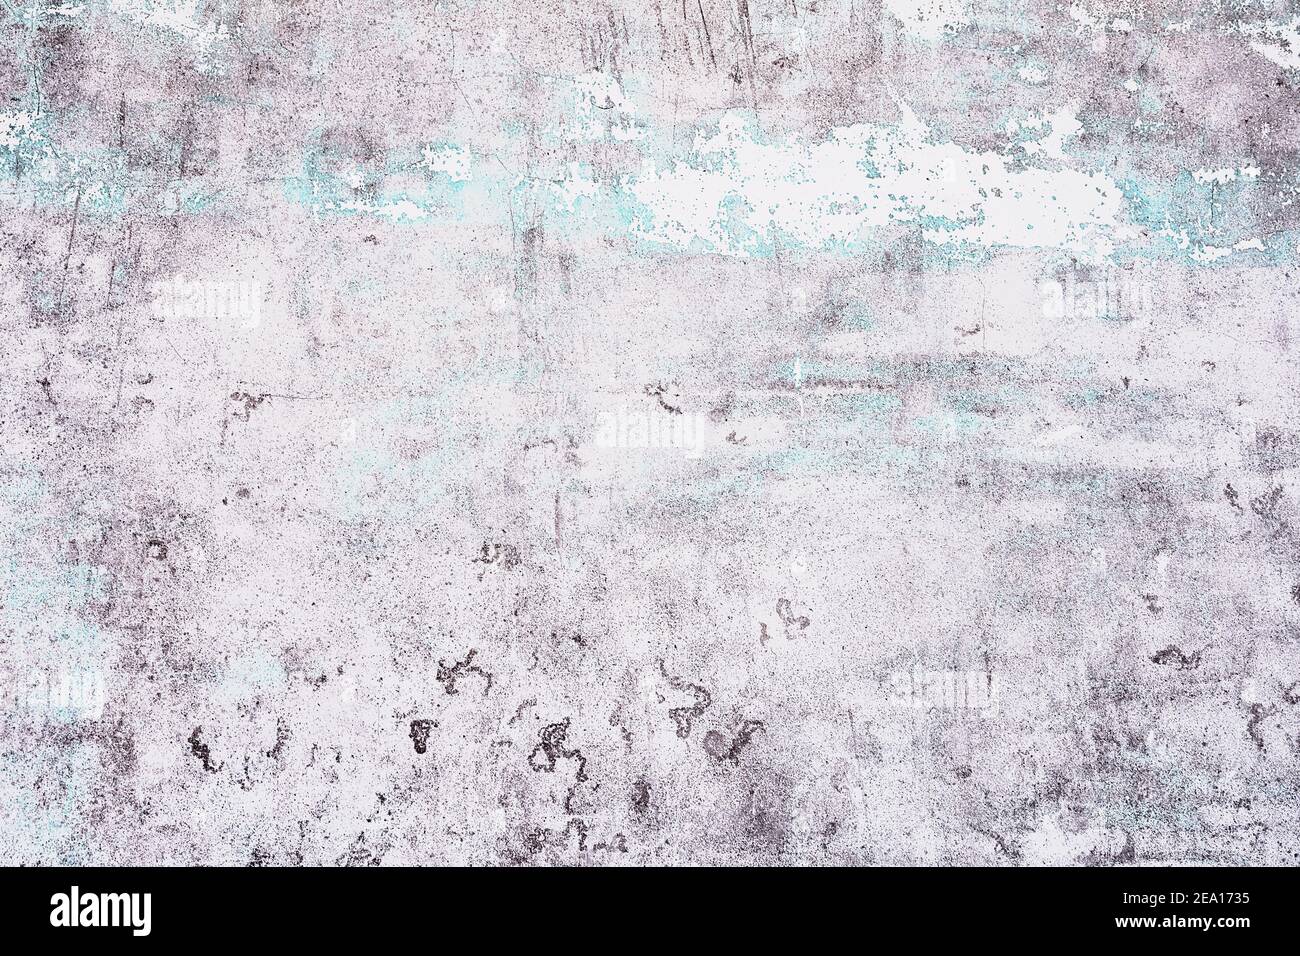 Old white with blue texture peeling off concrete wall Stock Photo